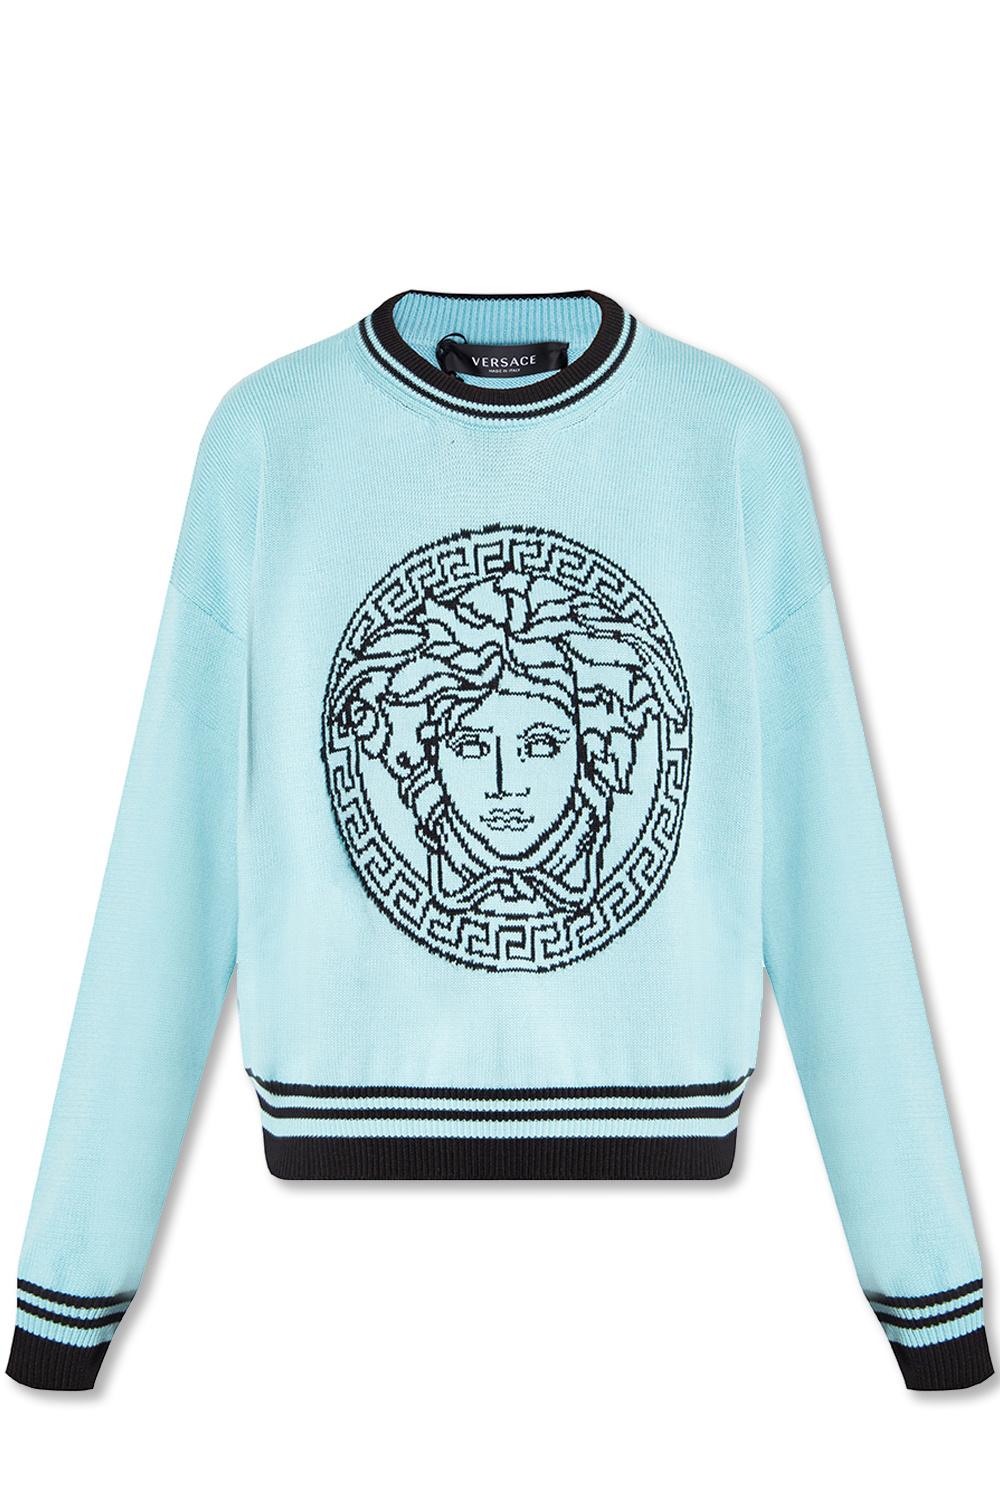 Versace Sweater With Medusa Head in Blue | Lyst